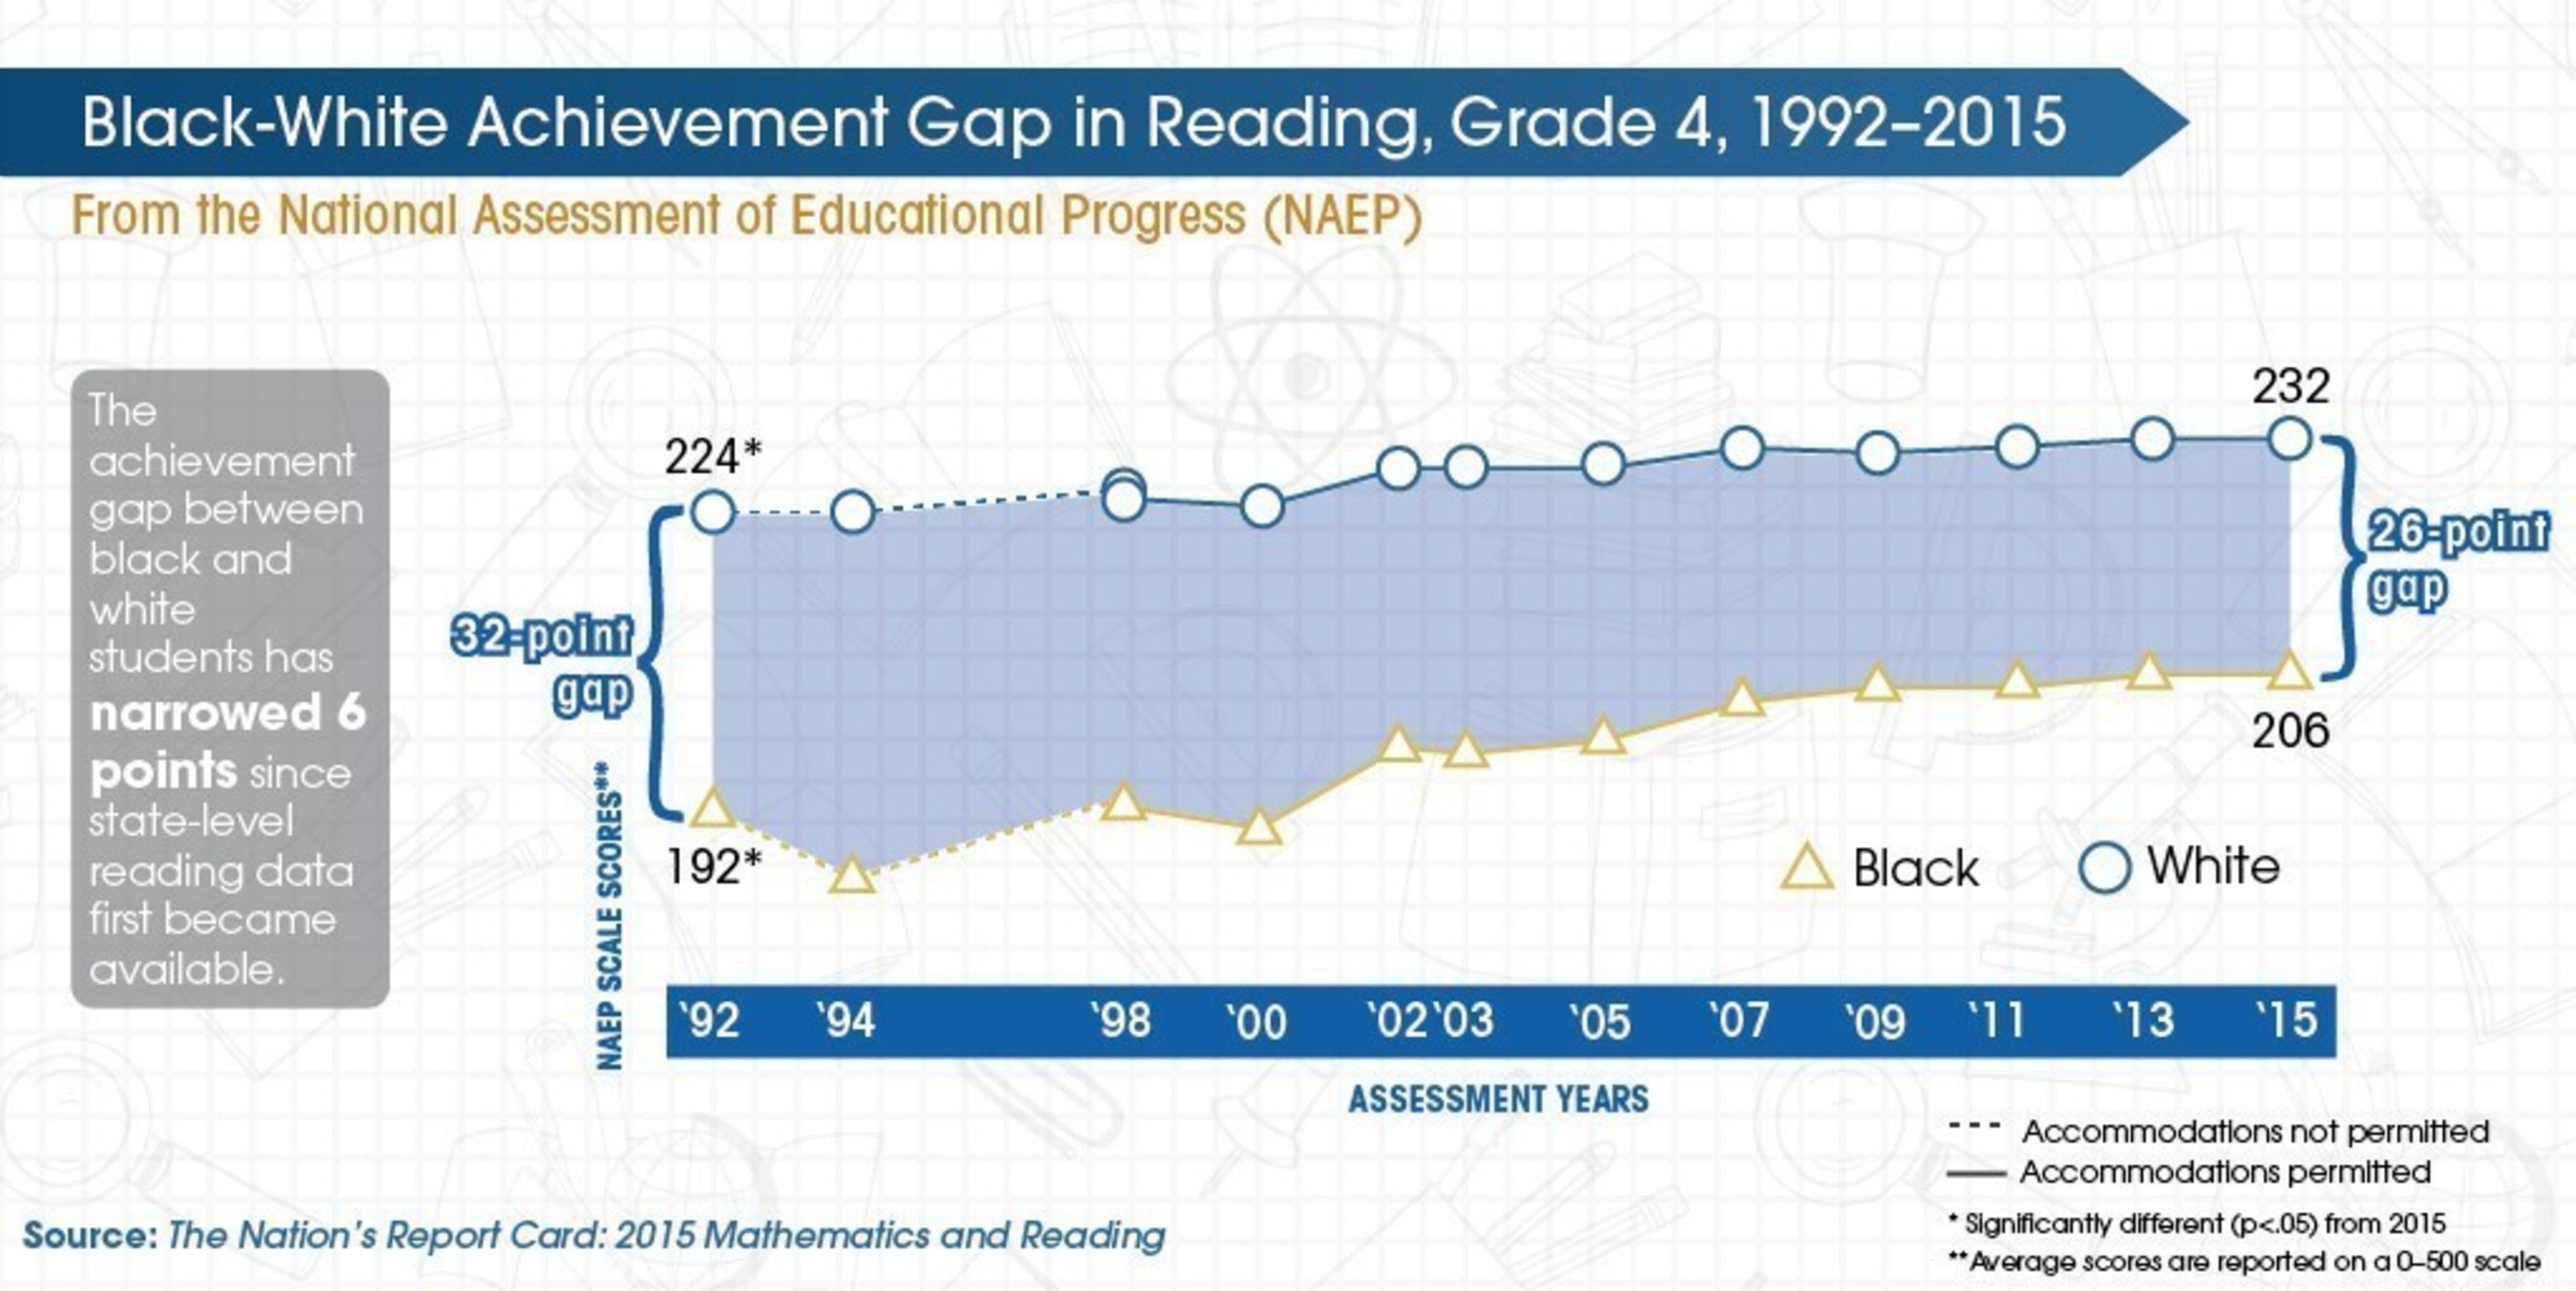 In 2015, the achievement gap between black and white students has narrowed 6 points since state-level reading data became available.